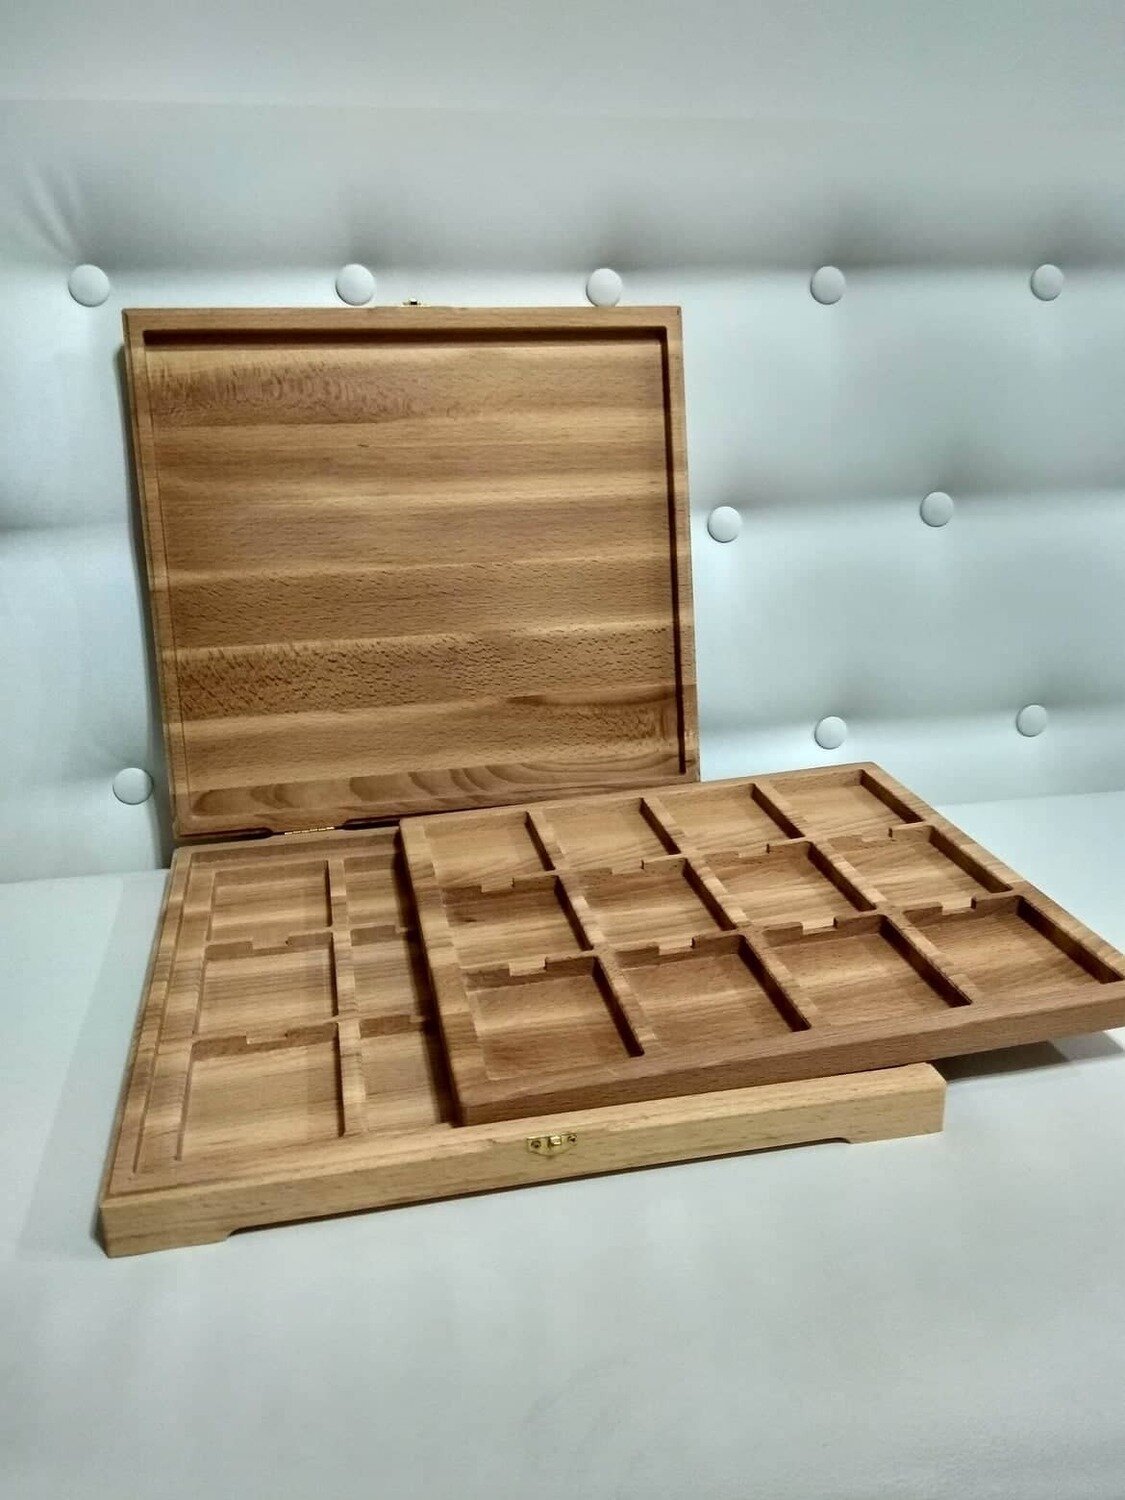 Wooden case for 24 coins in PCGS slabs. Material: Beech.